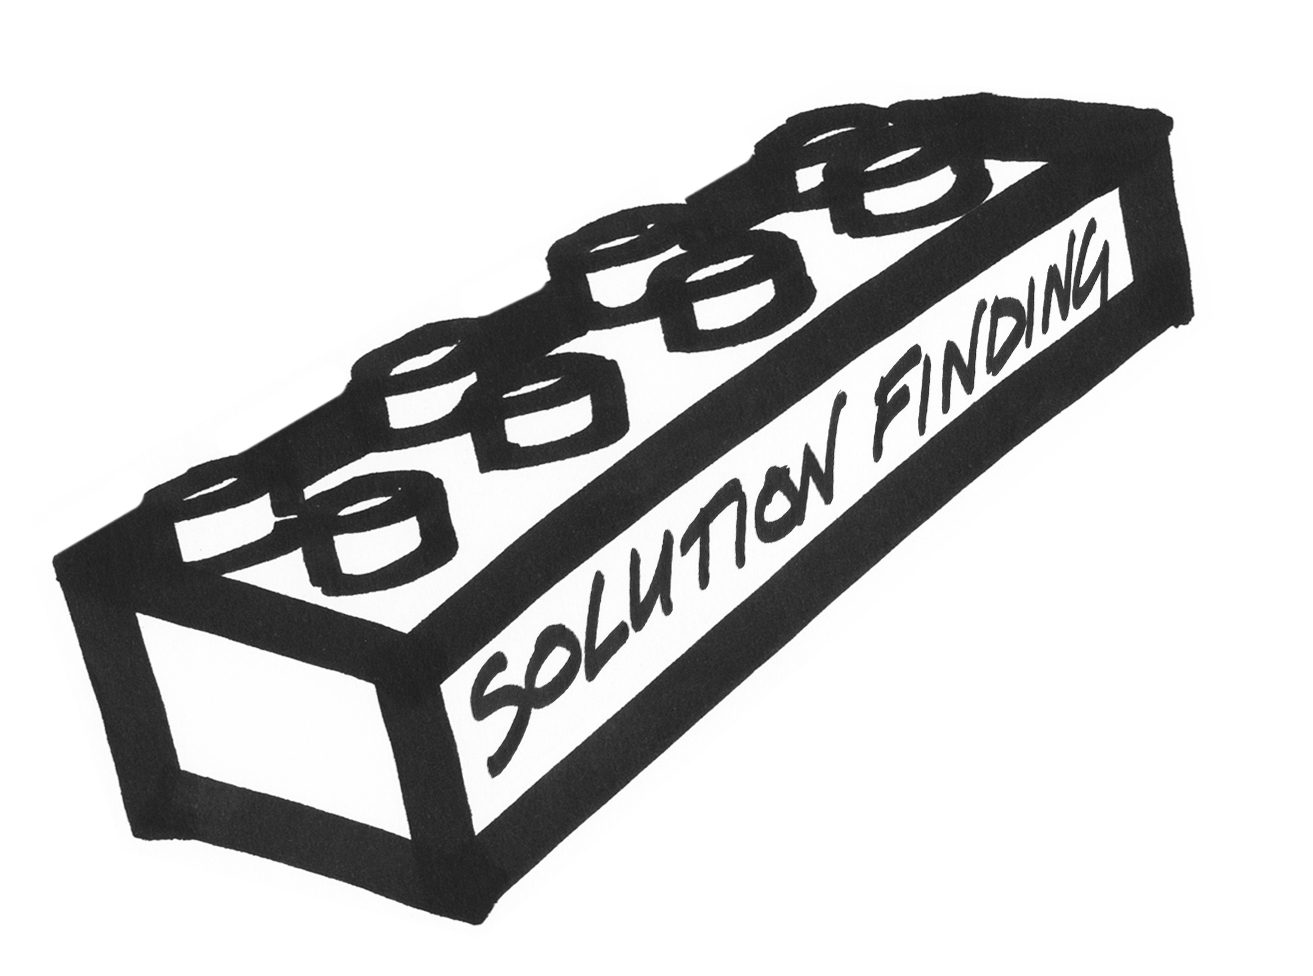 Lego-style brick saying 'solution finding'